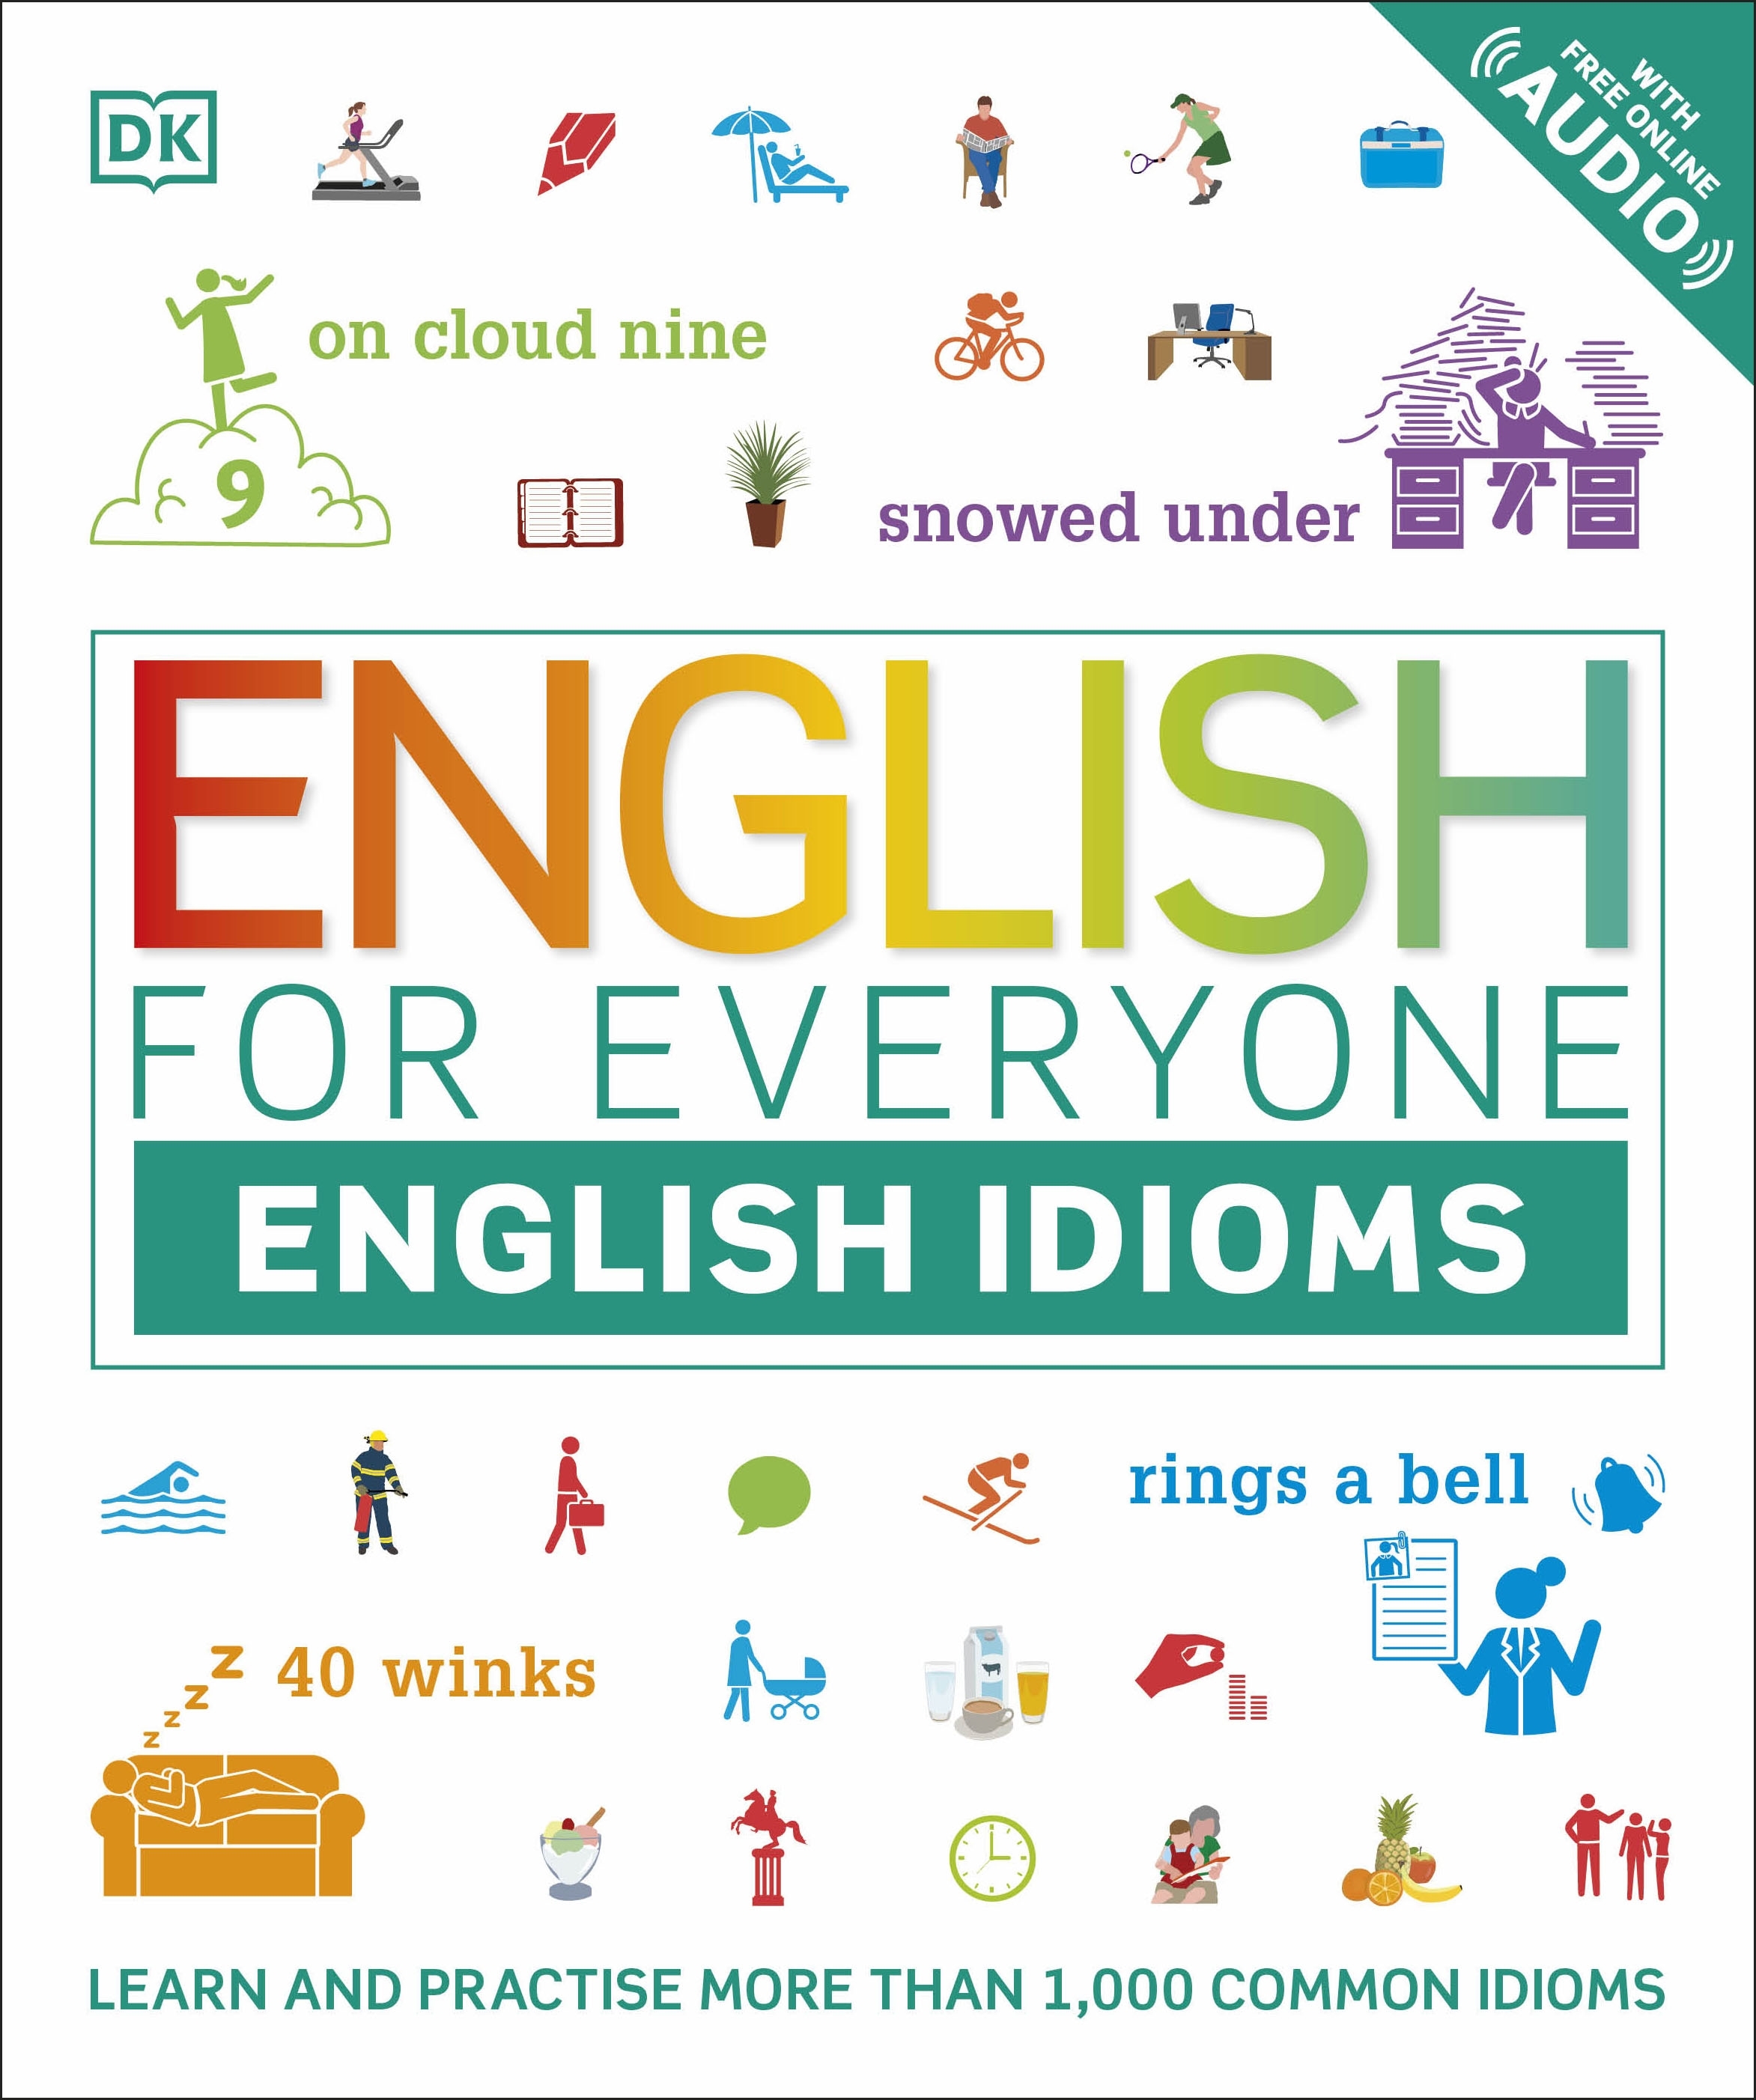 English For Everyone English Idioms By DK Penguin Books Australia